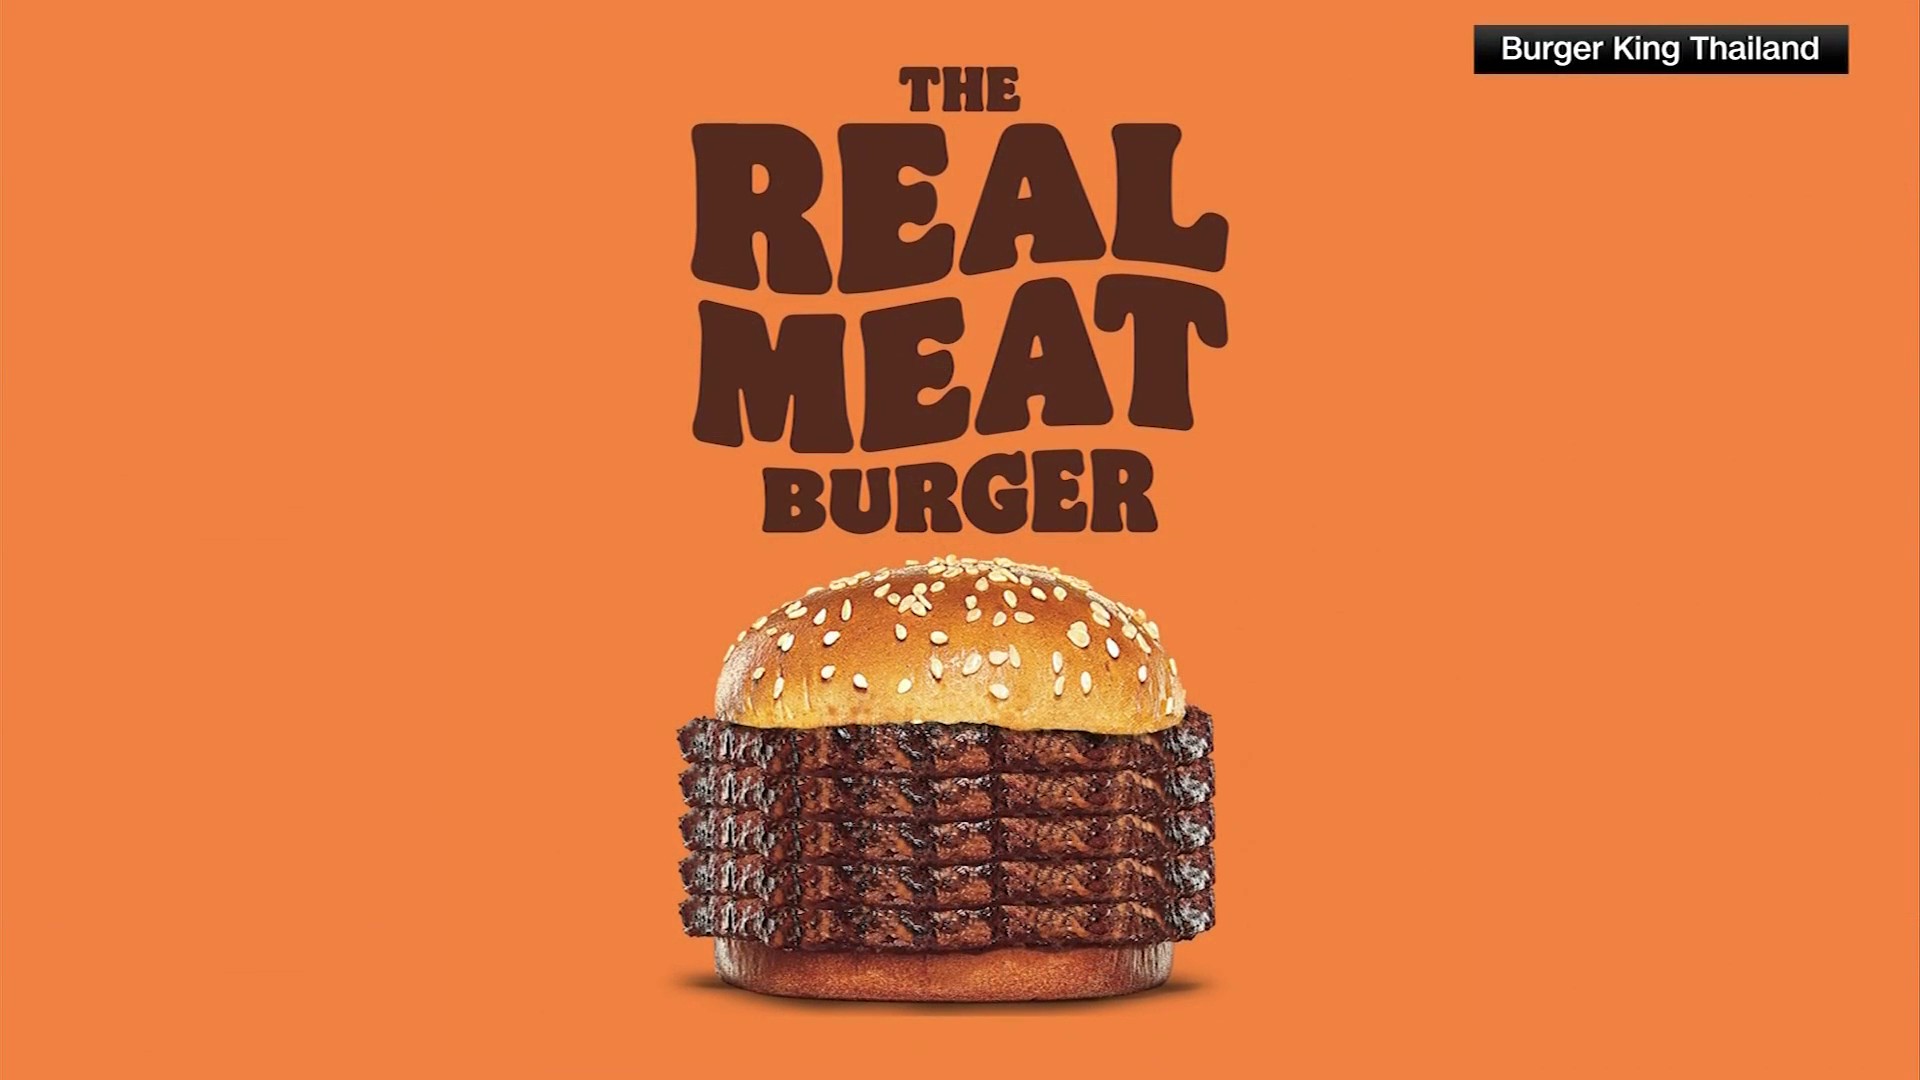 Burger King Thailand's 'Real Meat Burger' Is a Tower of Terror